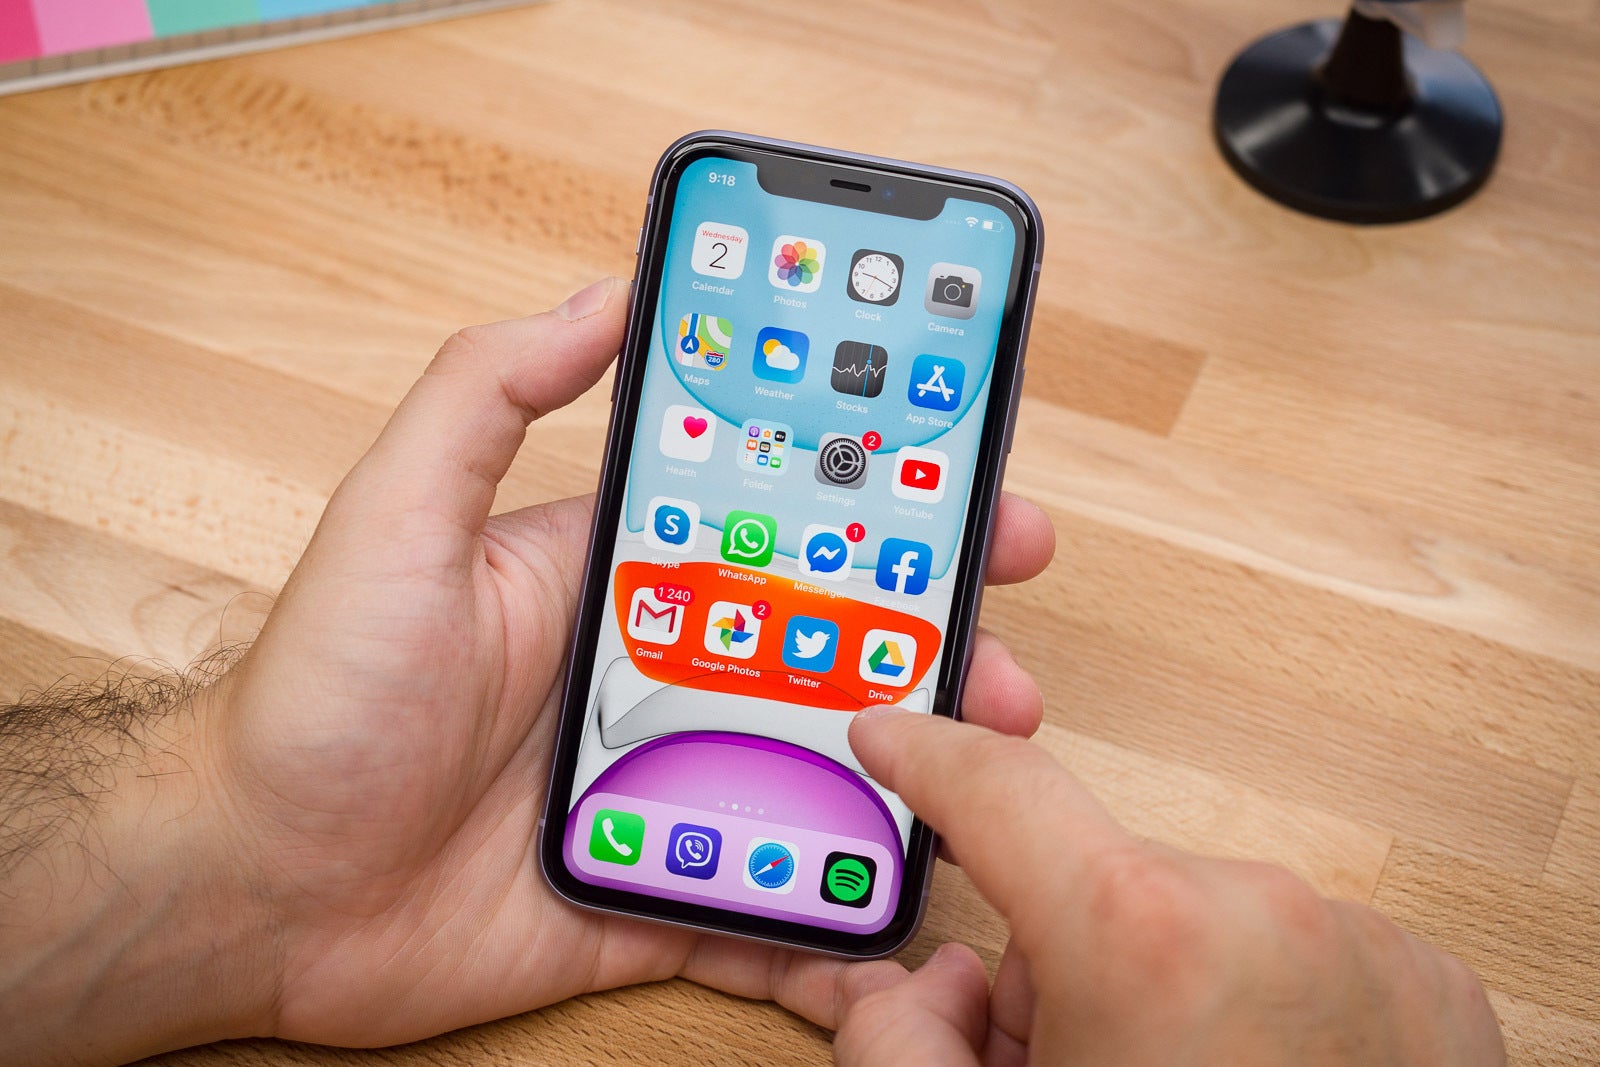 The iPhone 11 with its thick bezels and an LCD screen is now gone. Good riddance. - Apple&#039;s refreshed iPhone lineup ditches two models, check out which